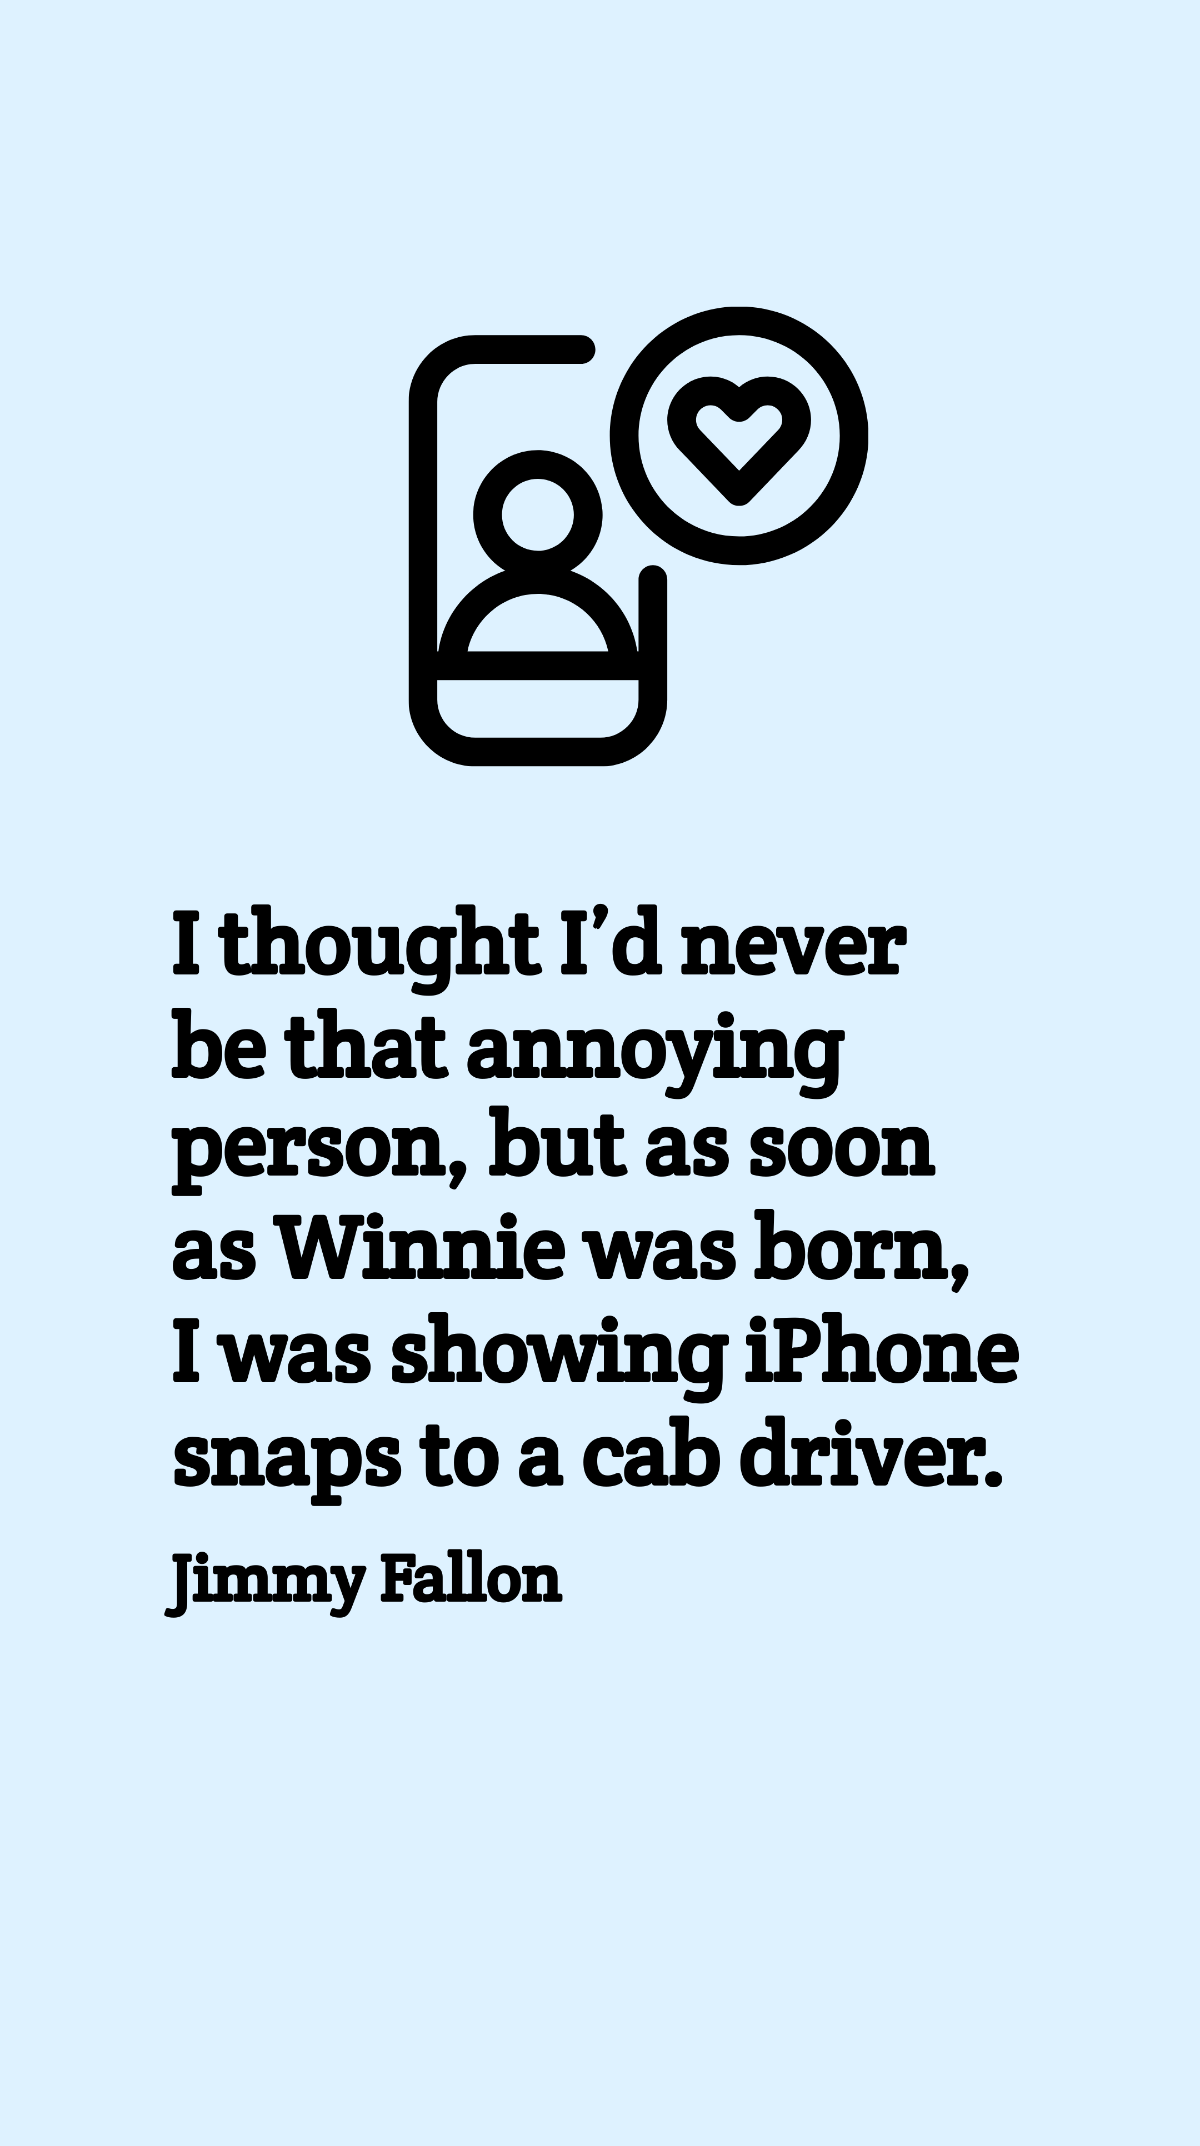 Jimmy Fallon - I thought I’d never be that annoying person, but as soon as Winnie was born, I was showing iPhone snaps to a cab driver.